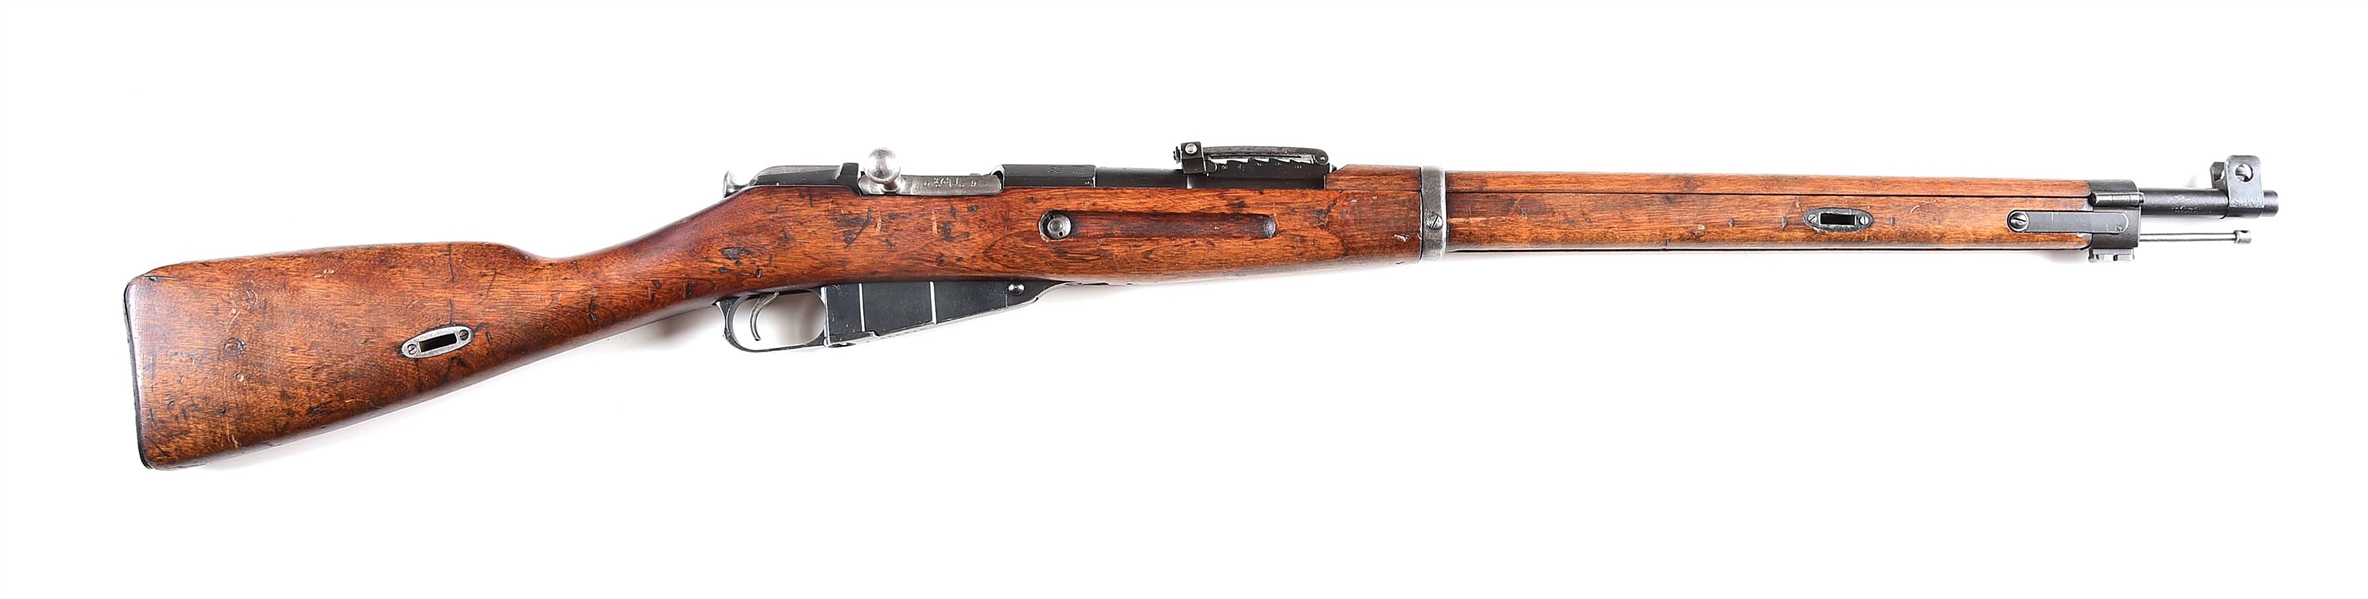 (C) EXTREMELY INTERESTING RUSSIAN M91 MOSIN NAGANT CAPTURED BY THE GERMANS IN WWI & LATER CONVERTED TO A FINNISH M27 BOLT ACTION RIFLE.